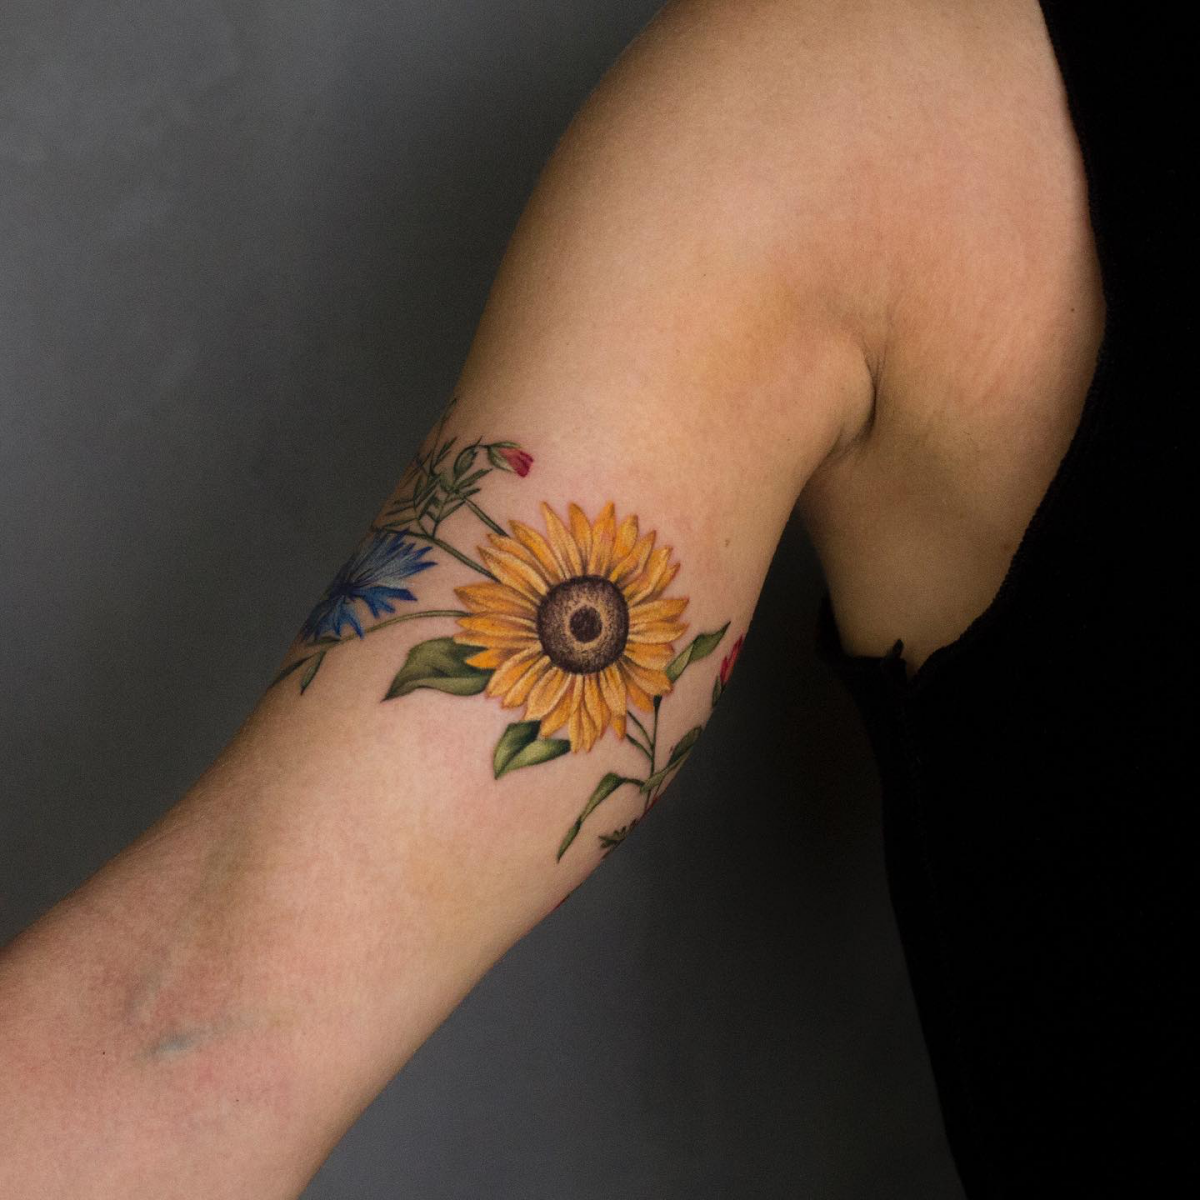 floral armband tattoo with sunflower